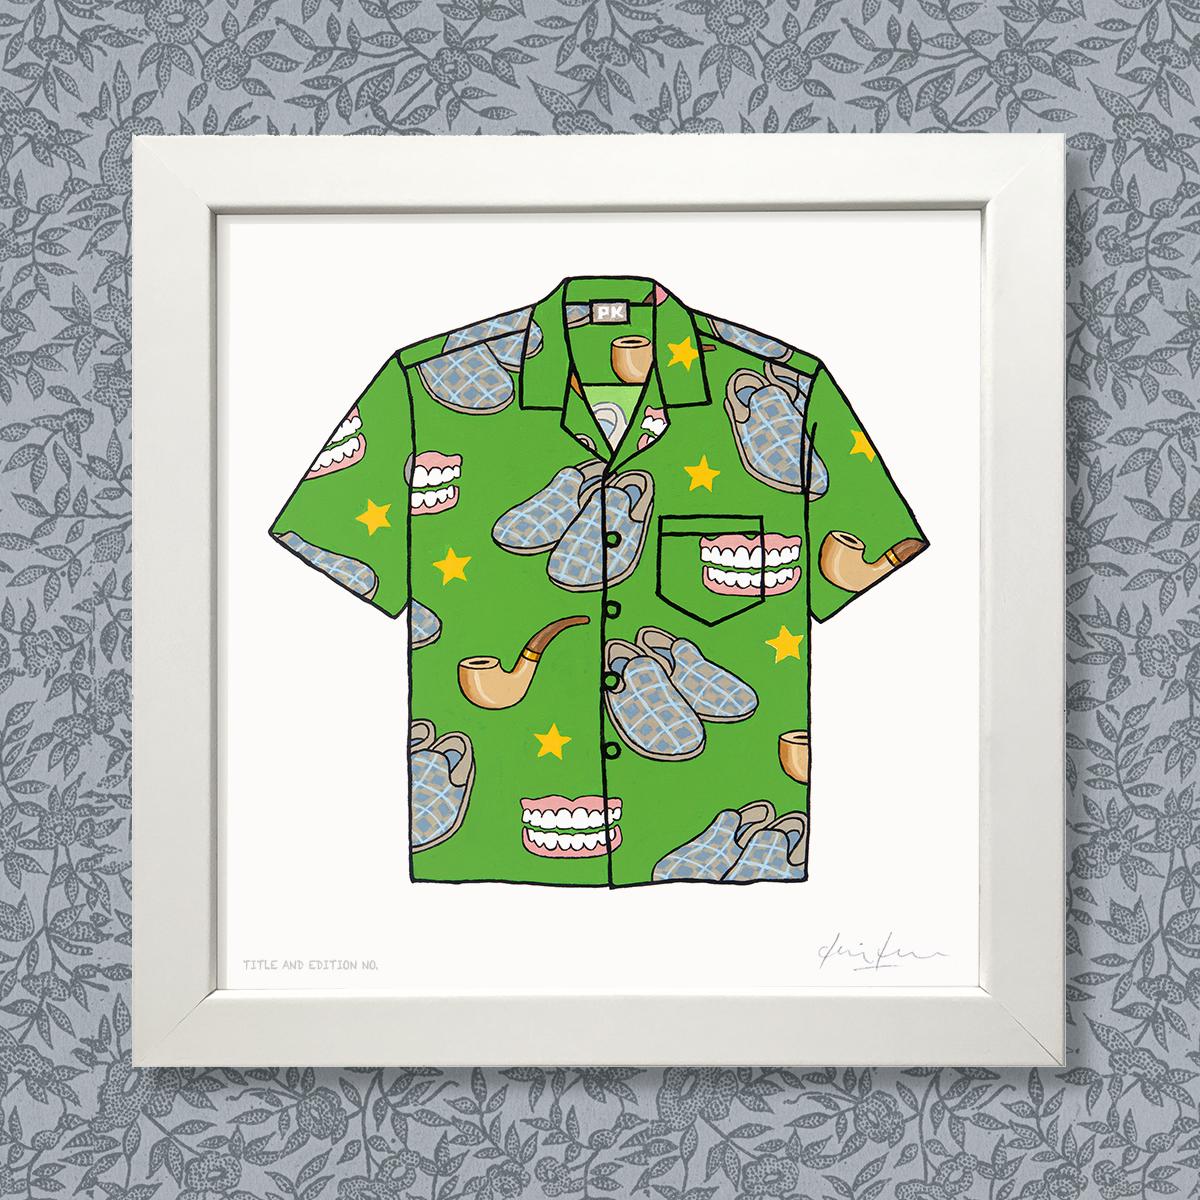 Limited edition print - Loud Grandad Shirt - in white frame